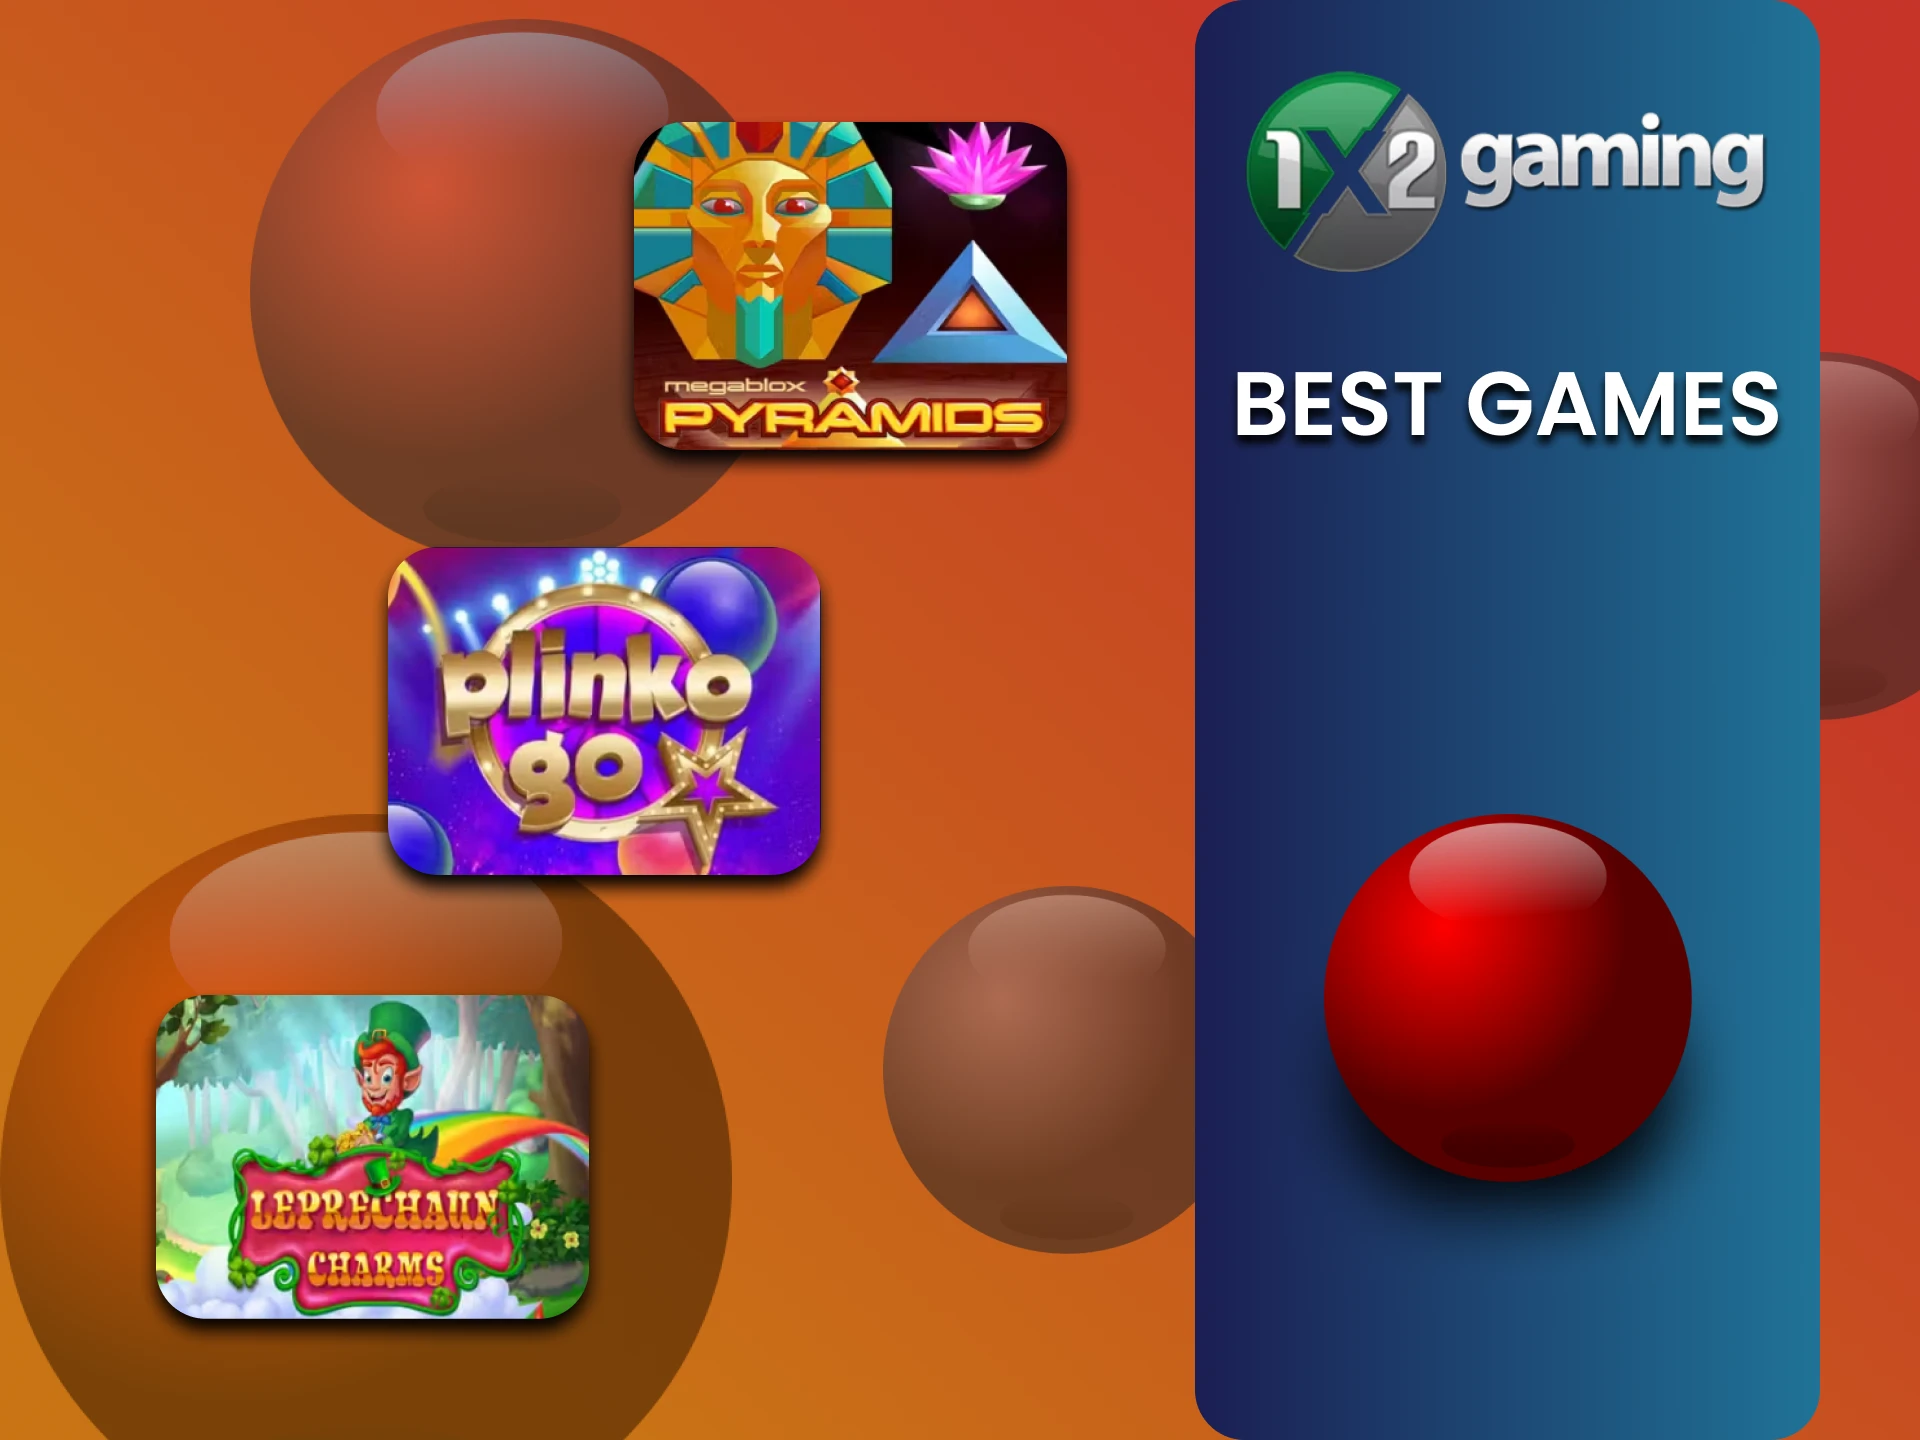 We will tell you about the best games from the 1x2 gaming provider.